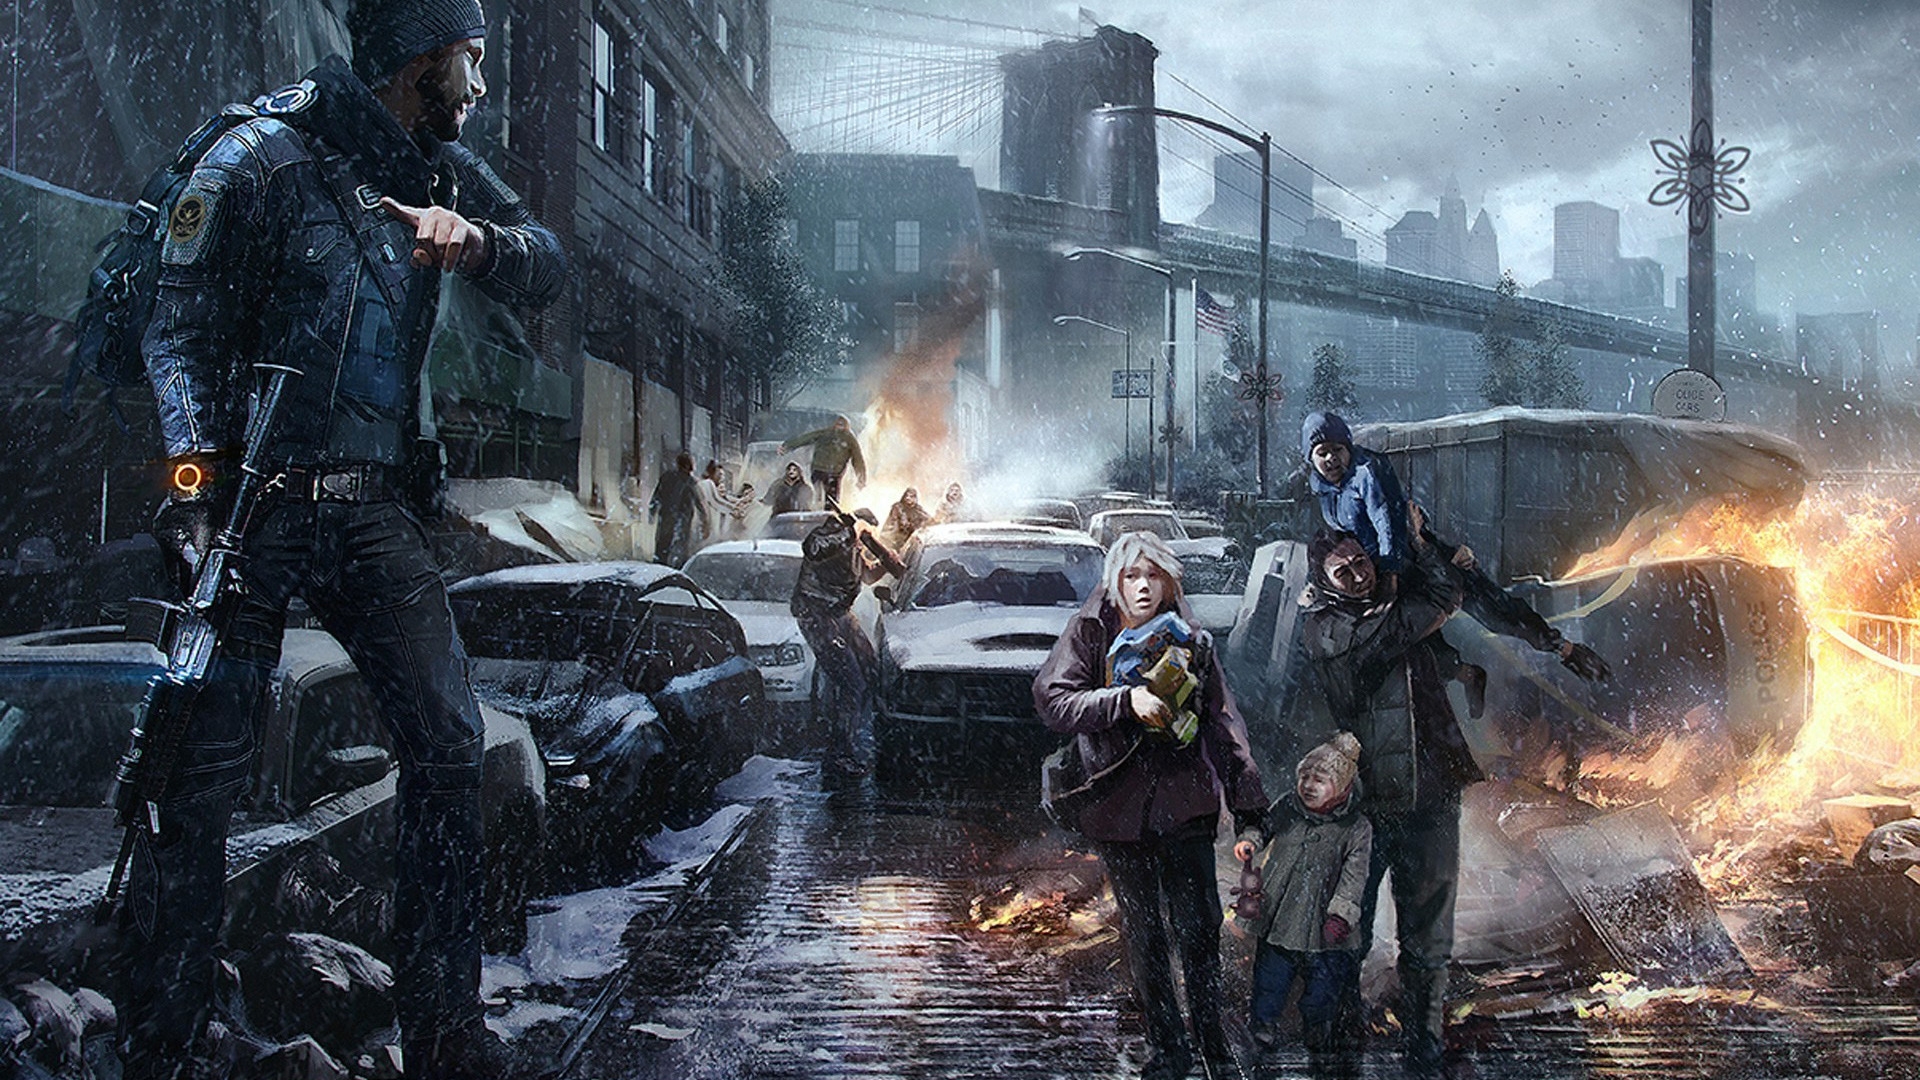 Tom Clancy The Division Fan Art for 1920 x 1080 HDTV 1080p resolution